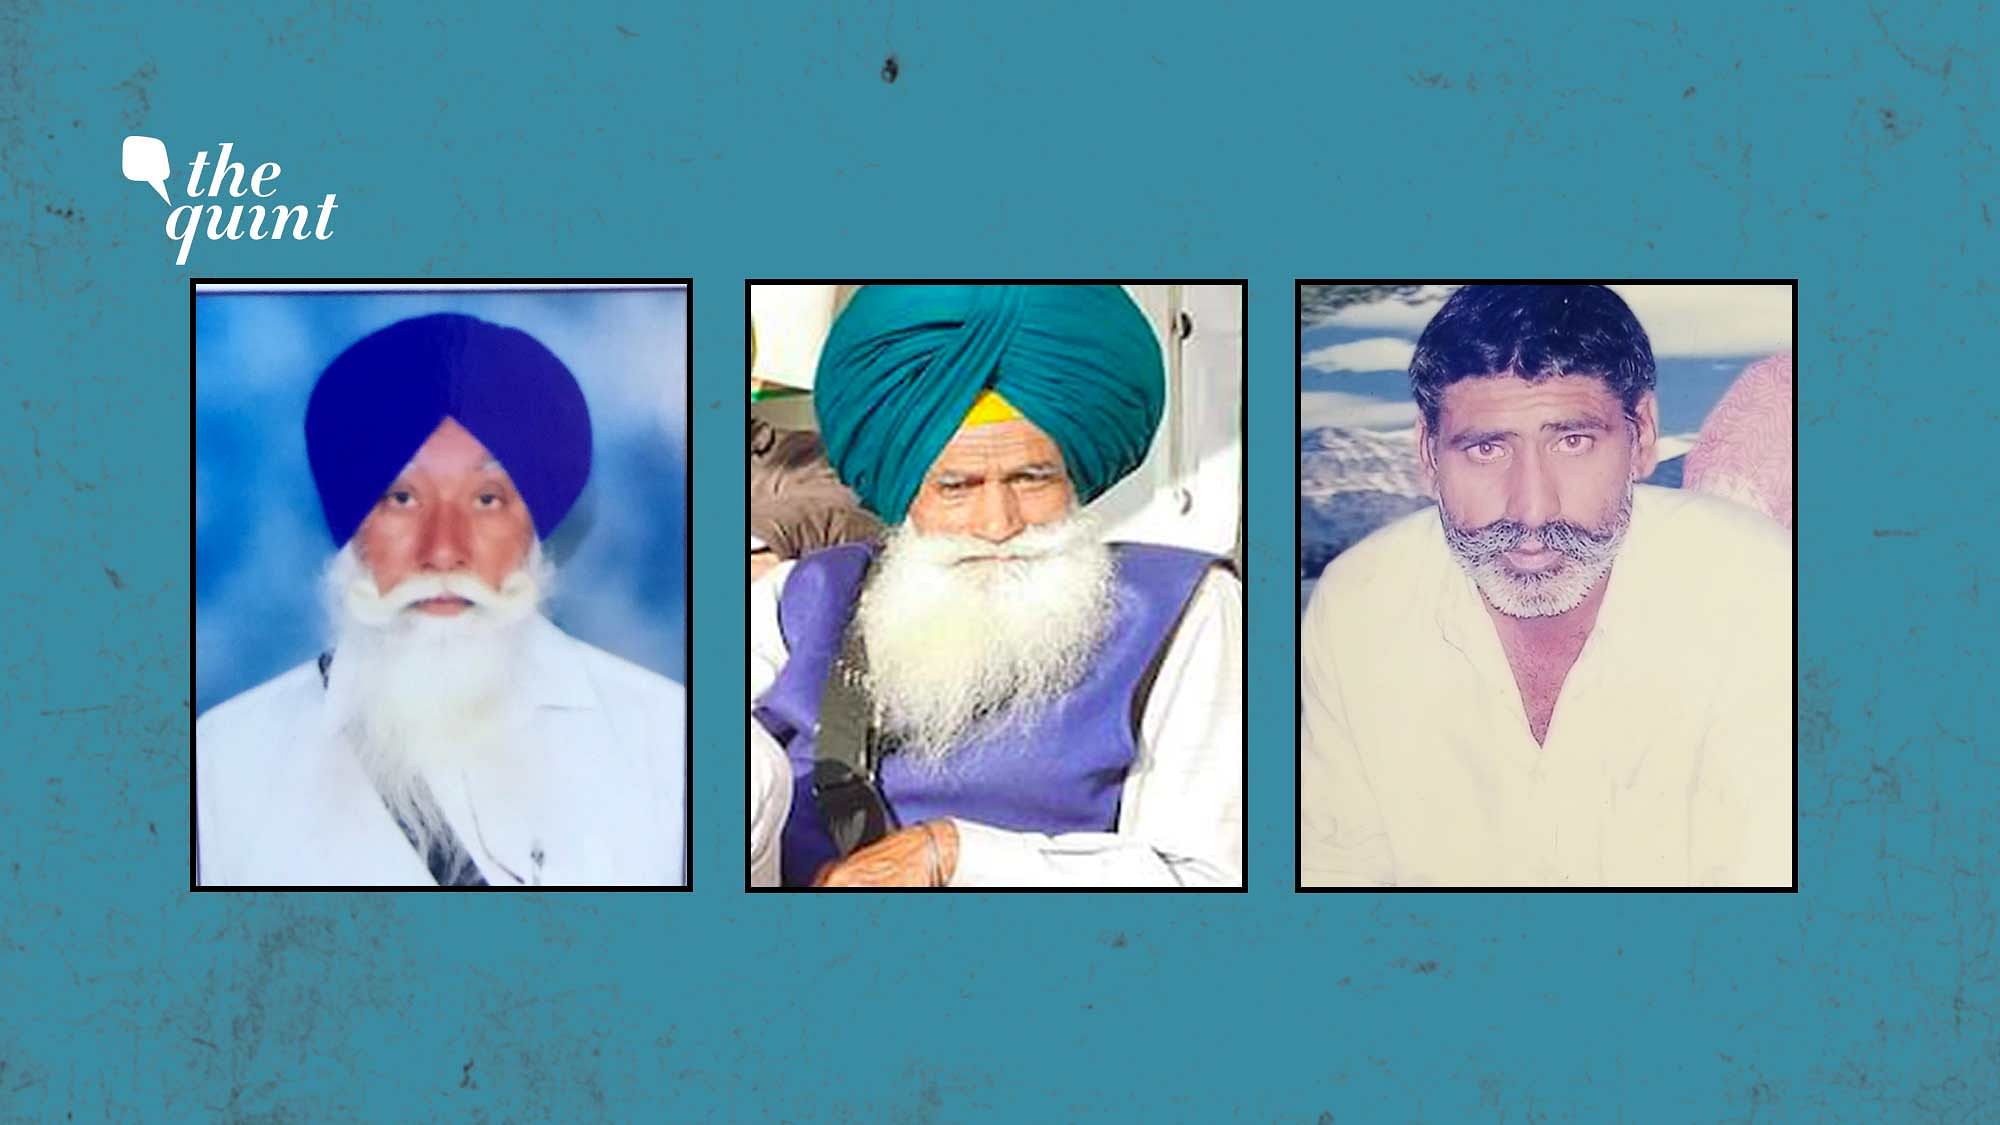 The Quint spoke to the families of three senior citizens who were arrested by Delhi Police in farmers’ protest. All of them are in Tihar jail. One of them, an eighty-year-old, is an ex army man and a farmer in Punjab.